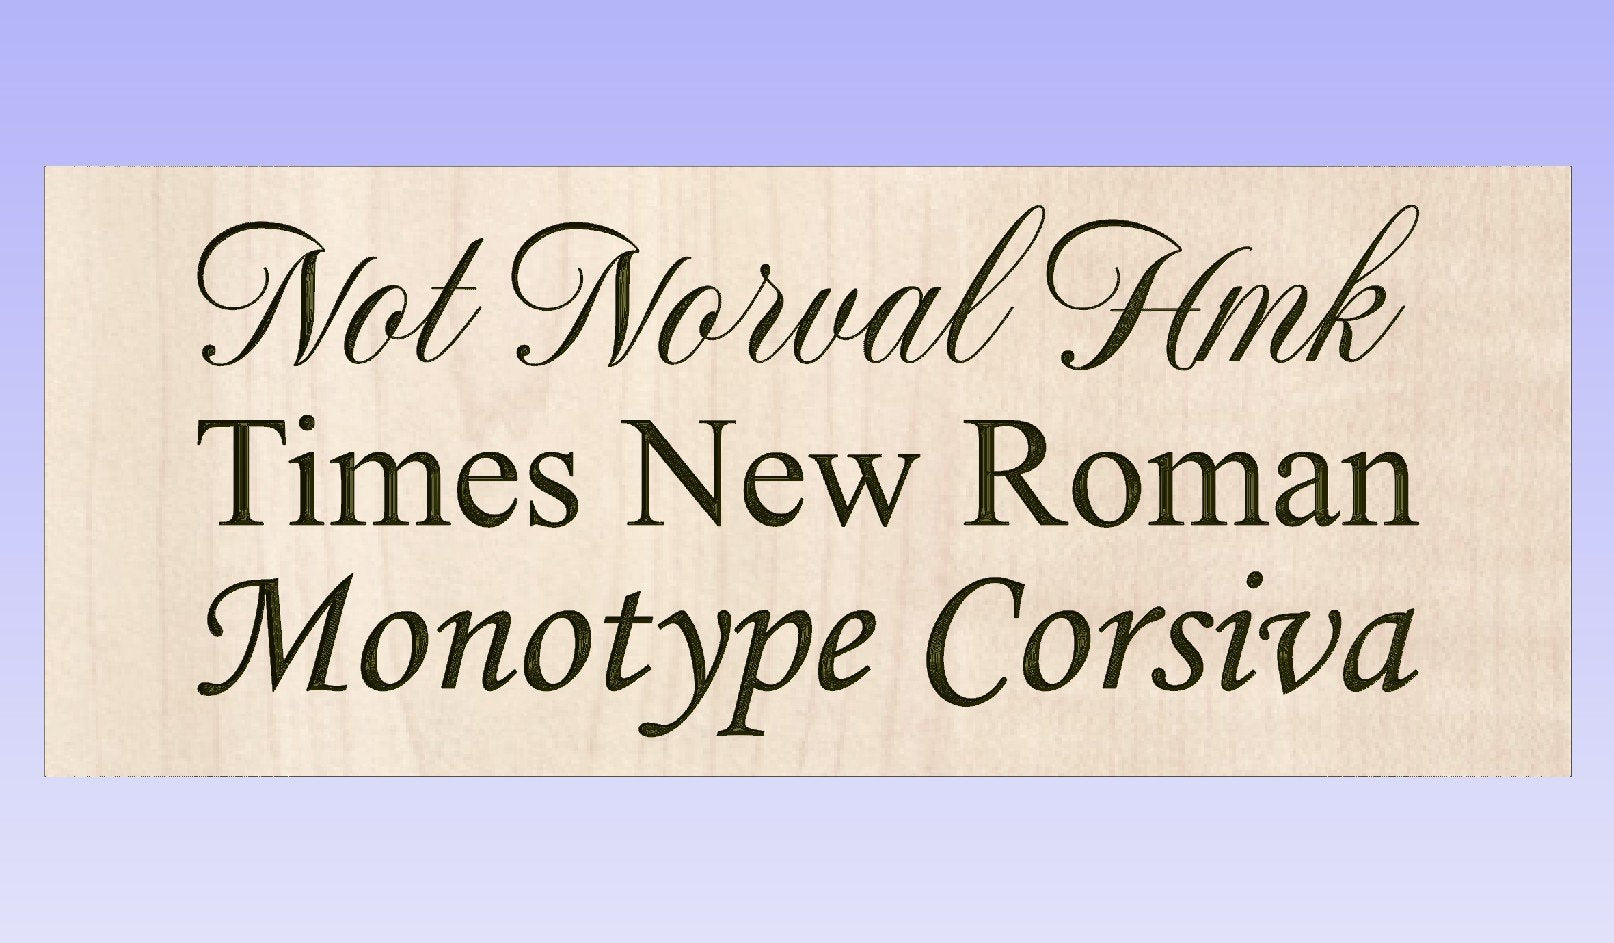 Shows the font differences for each offered option for the inscriptions. The choices are Not Norval HMK (flourished script text), Times New Roman (basic serif font), and Monotype Corsiva (a non-script font with a cursive style).